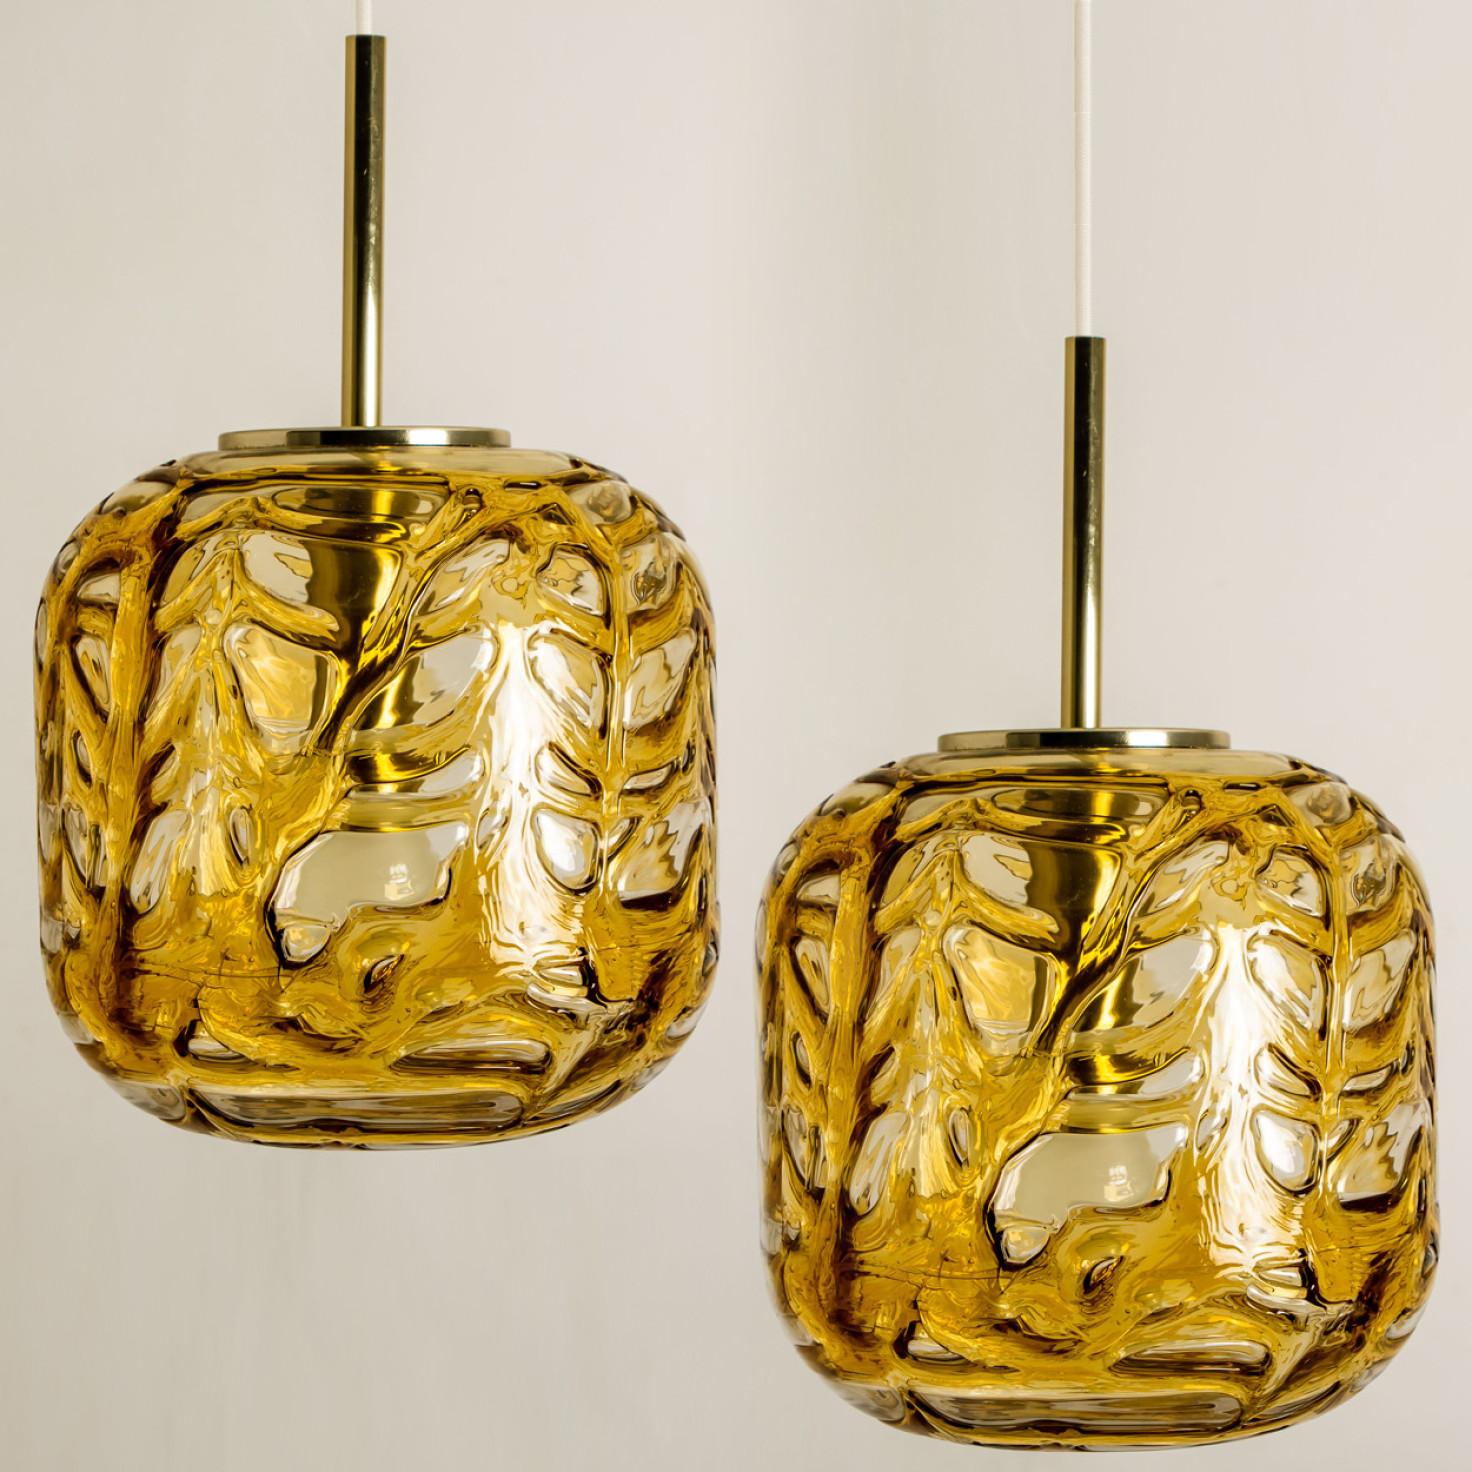 One of 2 Doria pendant lights (in collaboration with Murano) in the style of Venini, manufactured, circa 1960. Real statement pieces.
High-end thick Murano crystal glass shade made out of overlay glasses in the color yellow, applied in irregular